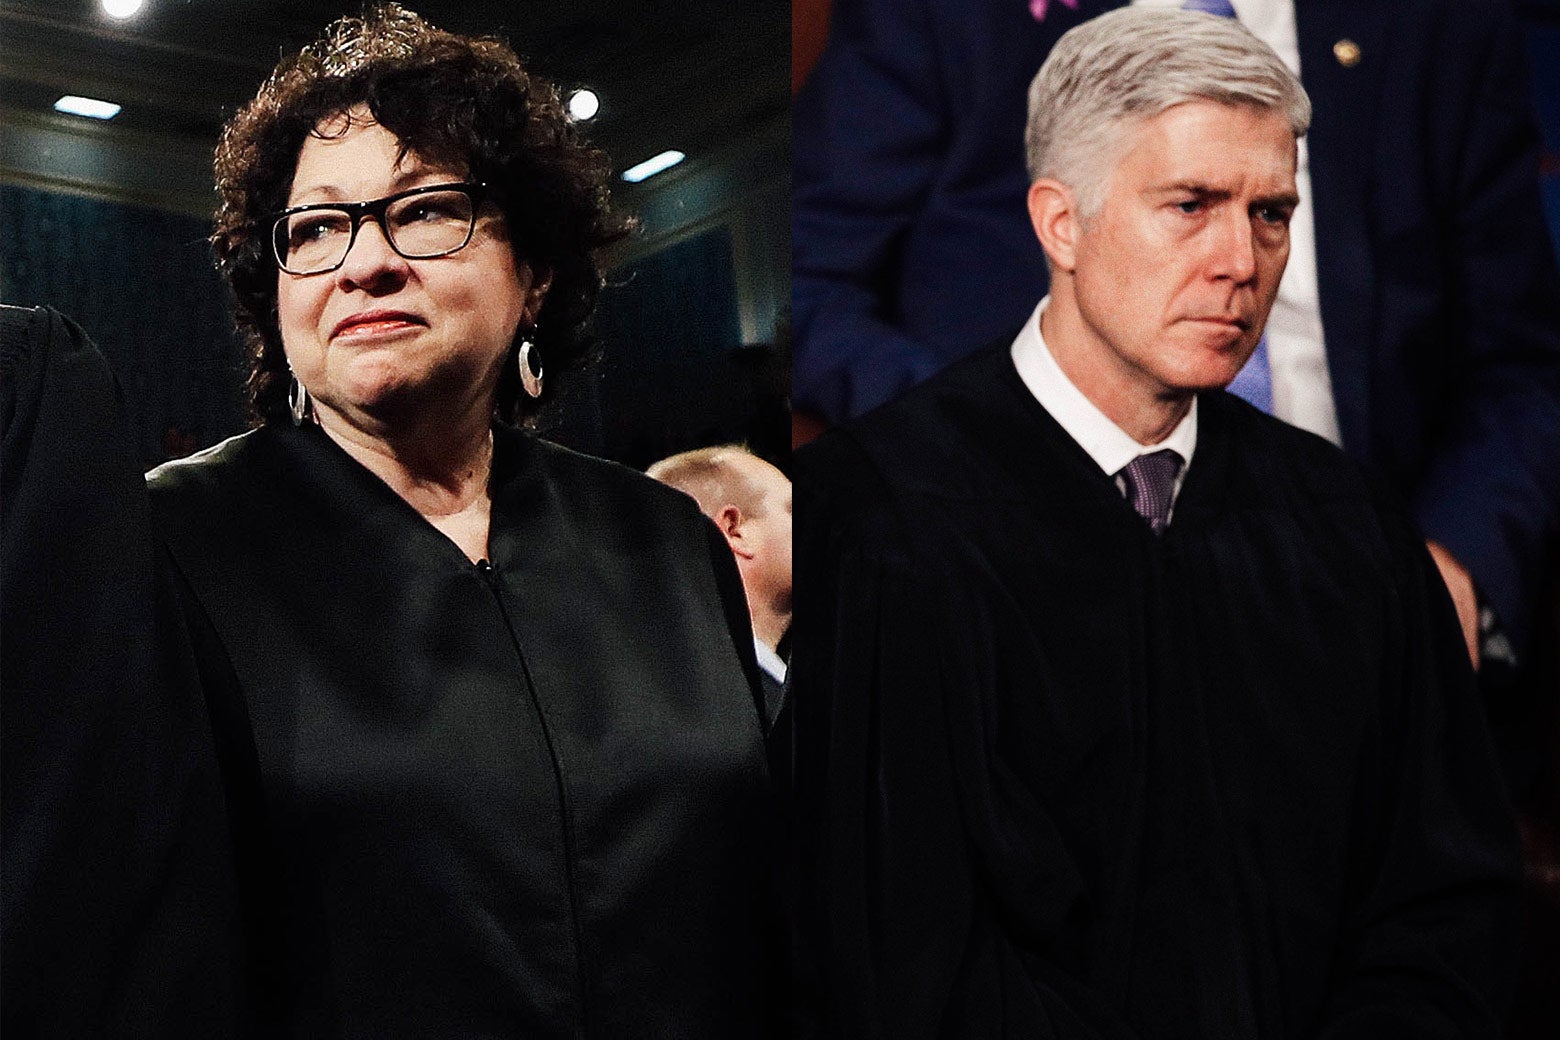 Sonia Sotomayor and Neil Gorsuch.